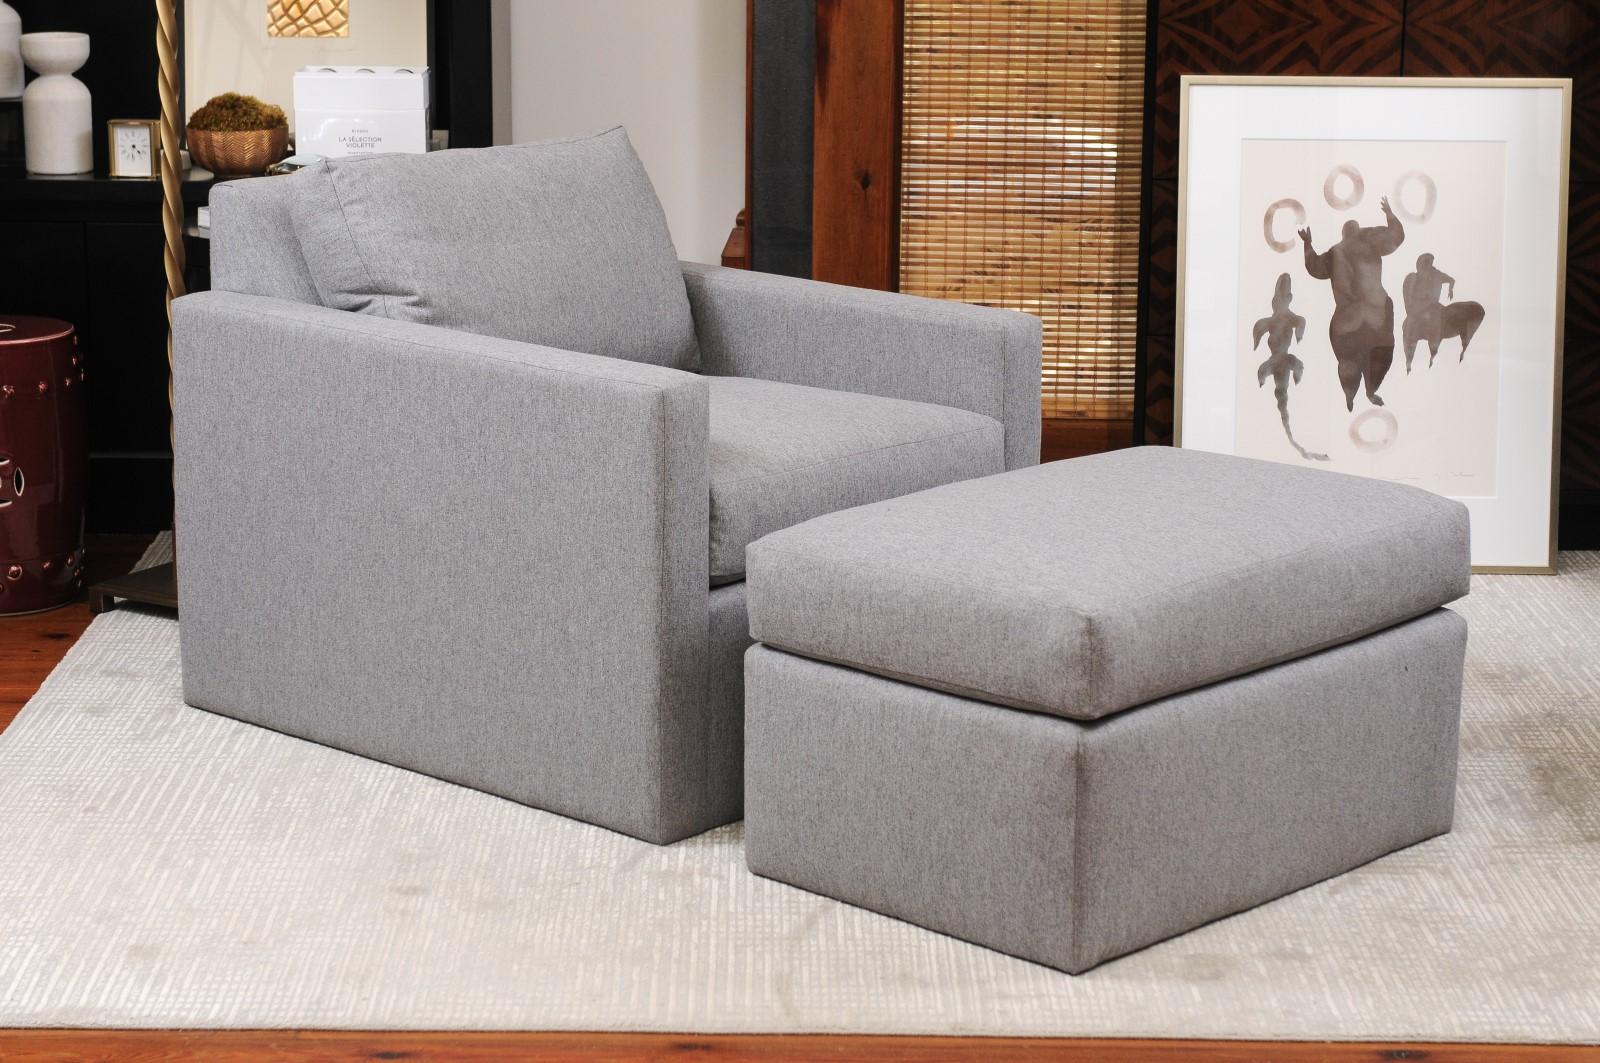 Please note this listing is for one chair and one ottoman. We do have two chairs (price to add a second chair available upon request to seller). No welt and upholstered to the floor. Fabric: James Dunlop Textiles - Prato color Dove Grey. This wool